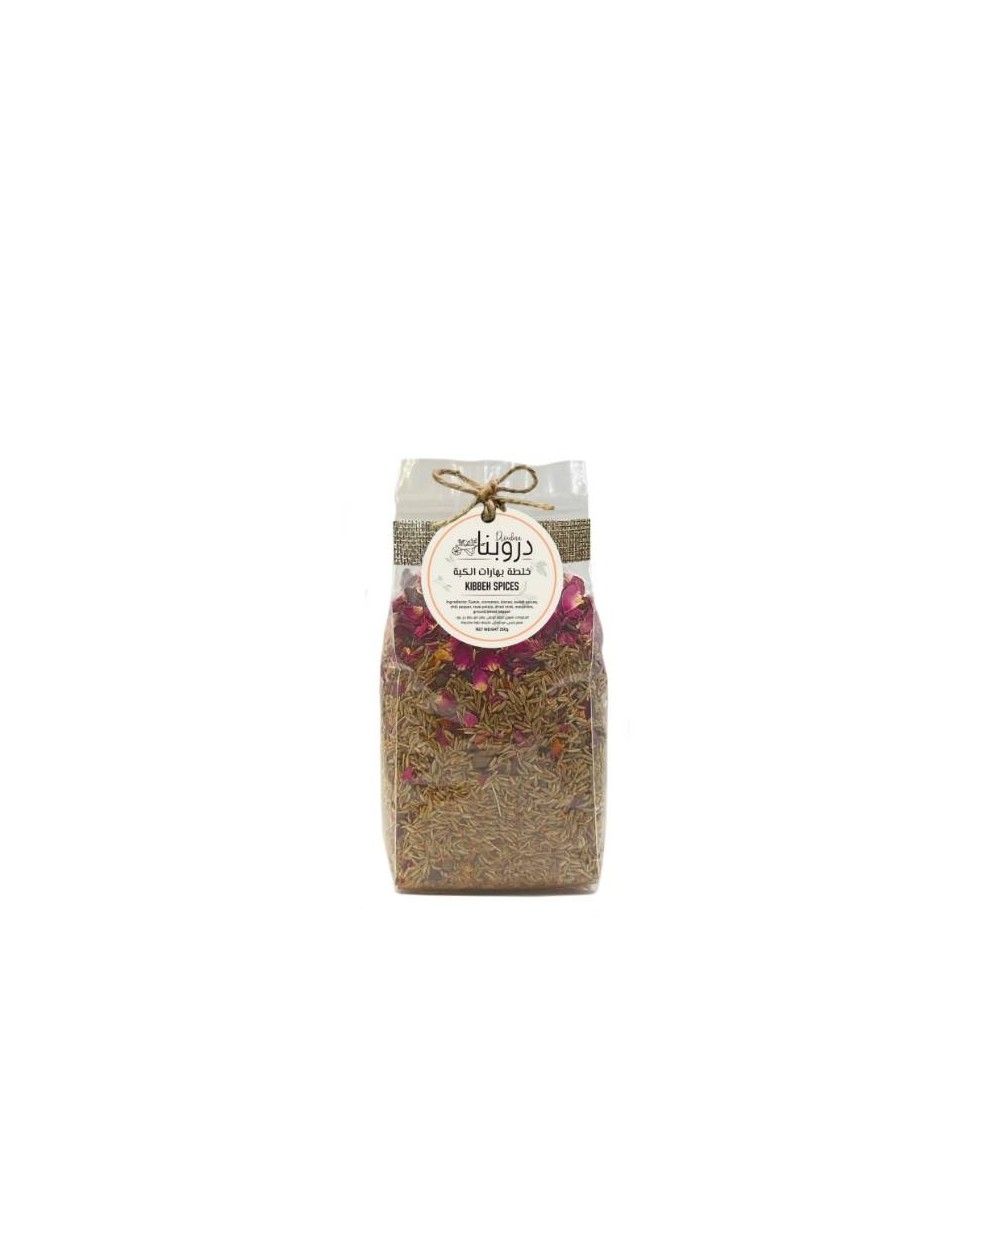 Kebbe spices | 250g